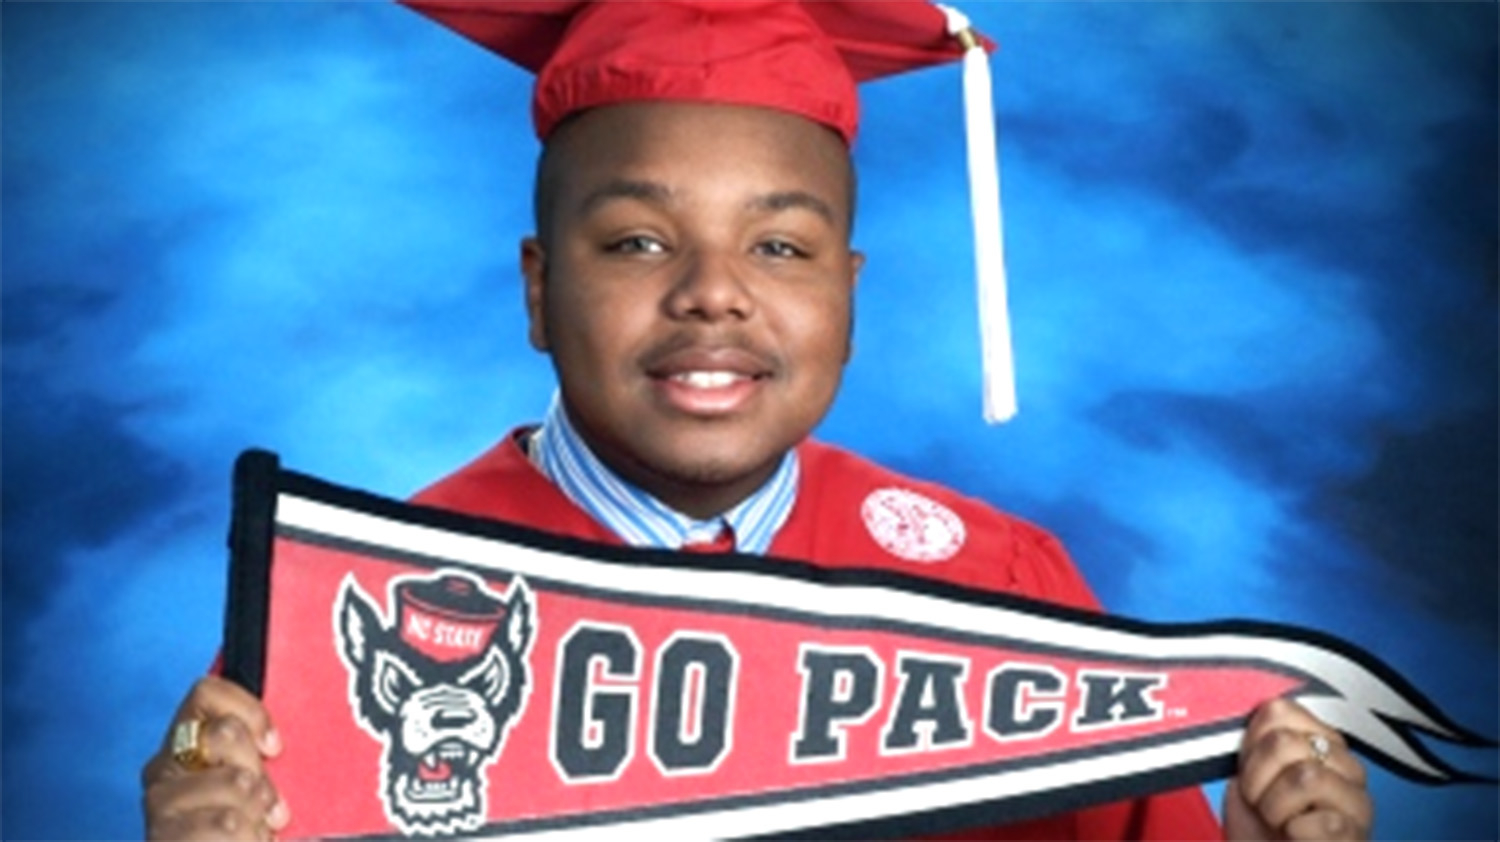 Messiah Williams graduated from NC State at 18 years old in May.